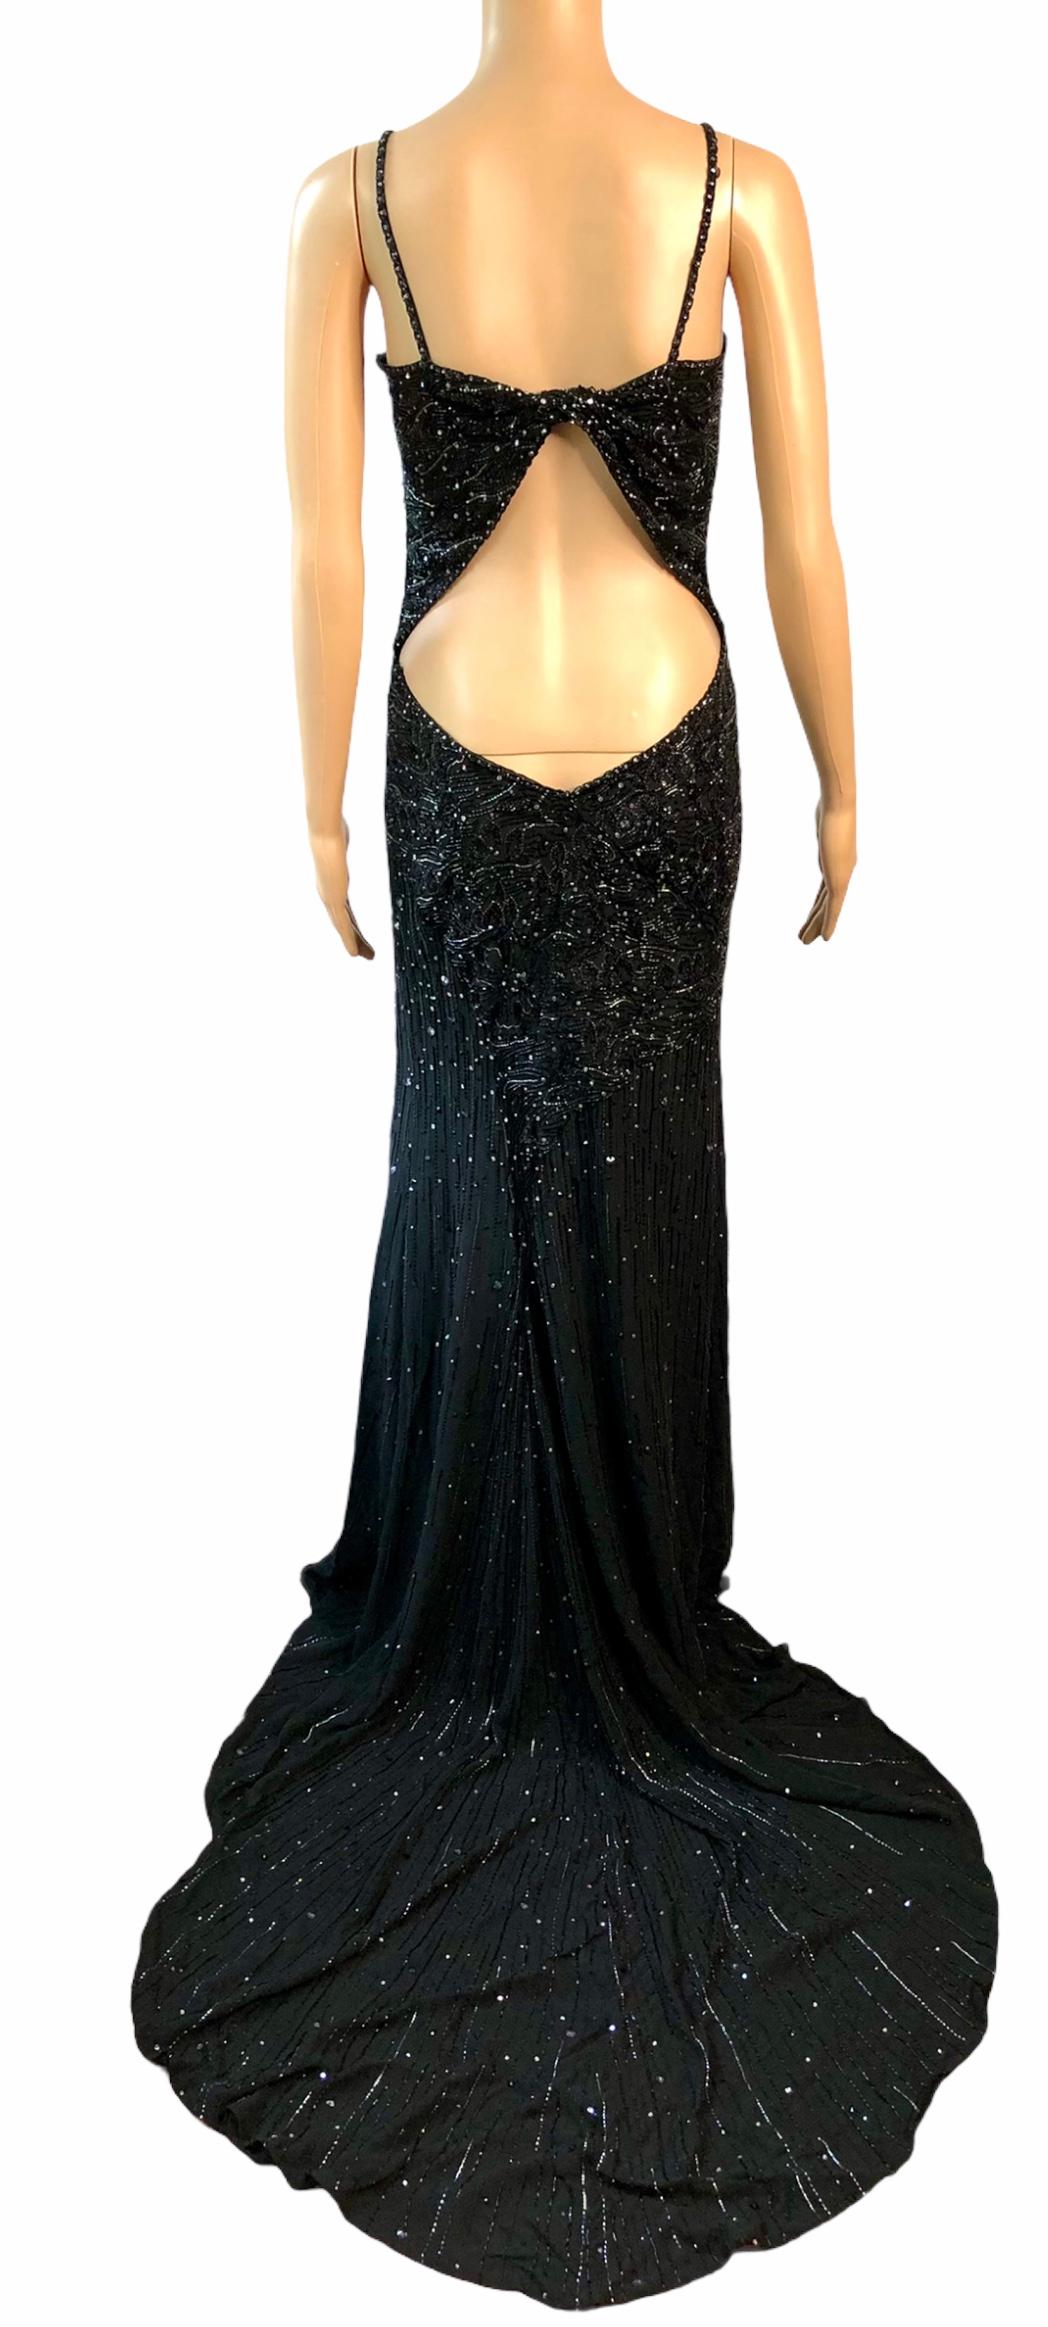 Women's Atelier Versace Haute Couture F/W 1998 Crystal Embellished Cutout Train Gown For Sale